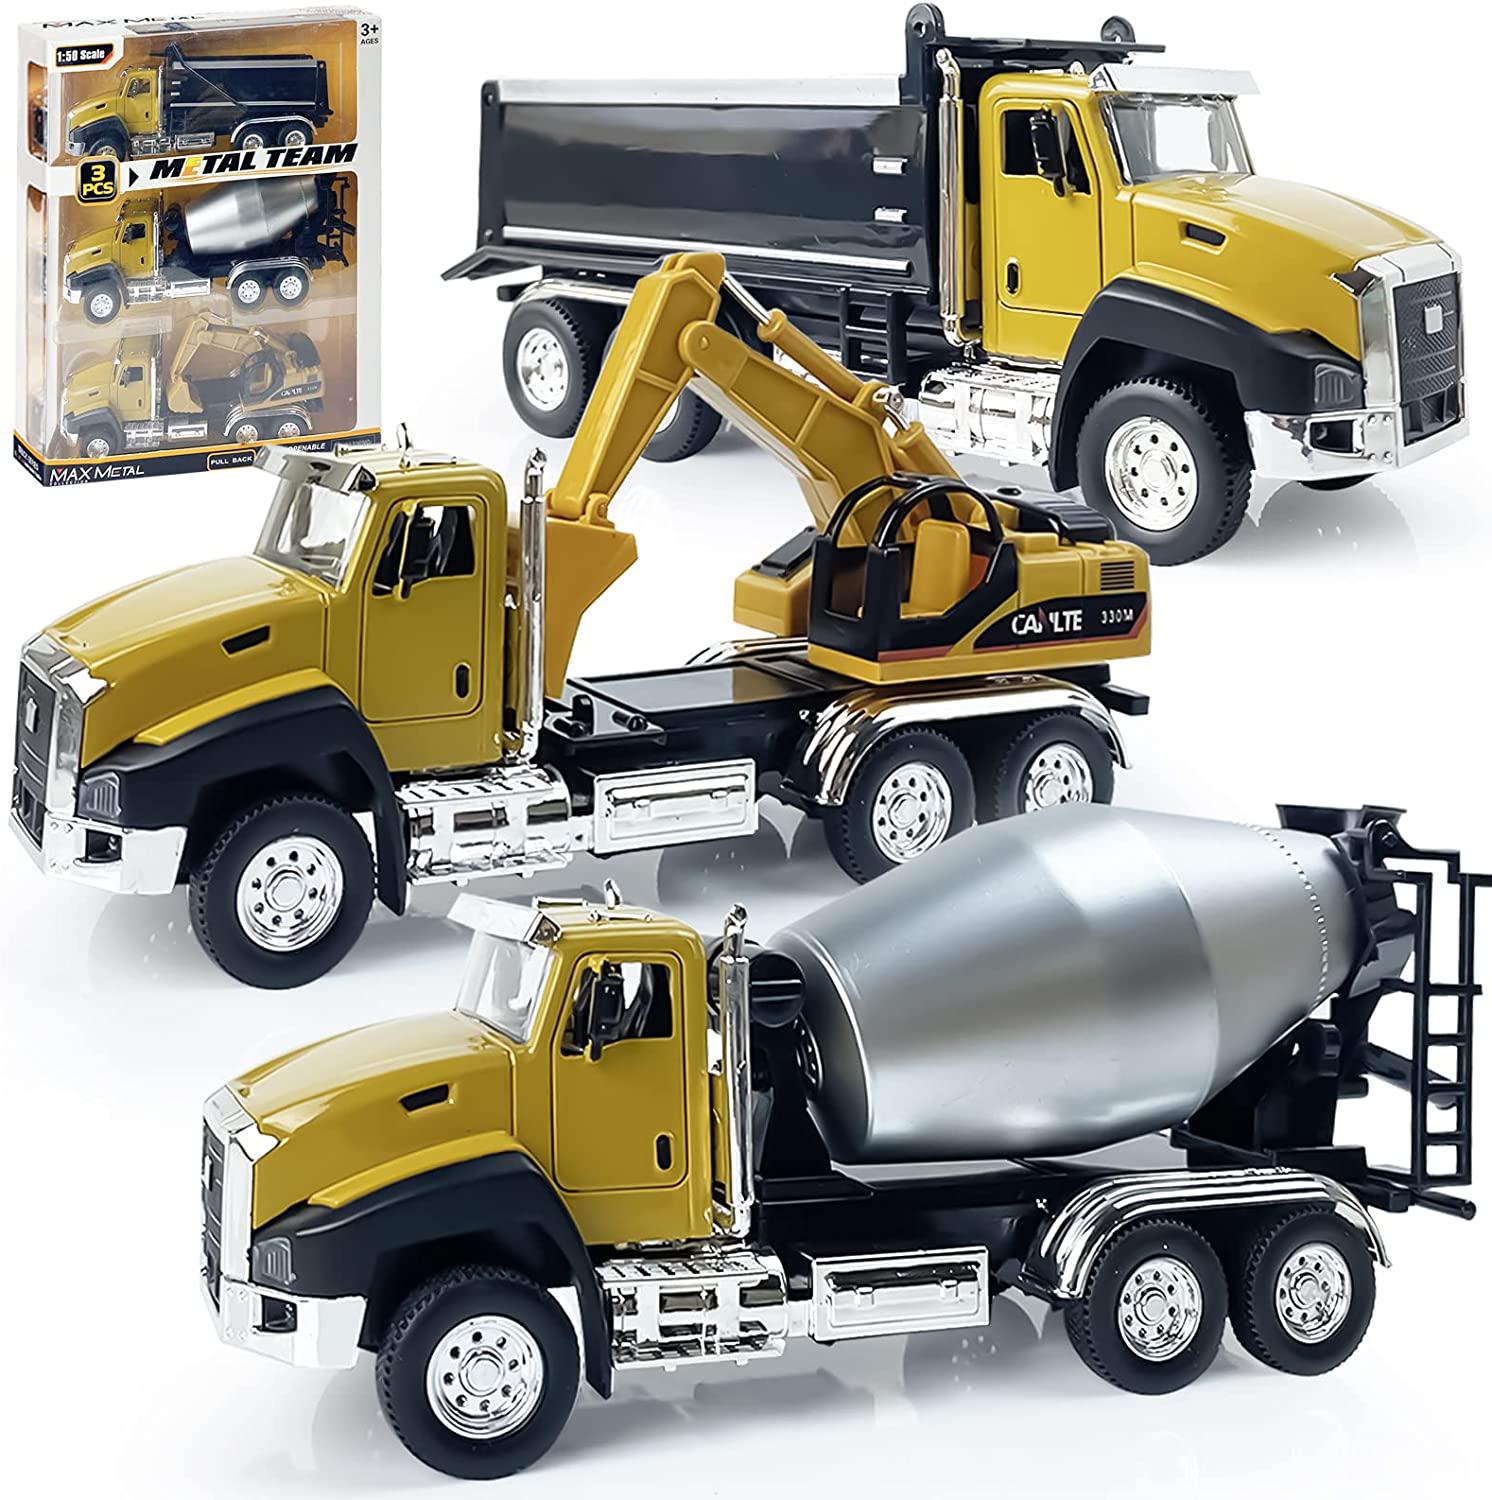 Seyaom, 1/50 Scale Metal Model Cars, 3 Pack of Engineering Construction Vehicles, Dump Truck, Digger, Mixer Truck, Pull Back Car Toys with Opening Doors for Boys and Girls (Construction Vehicles)